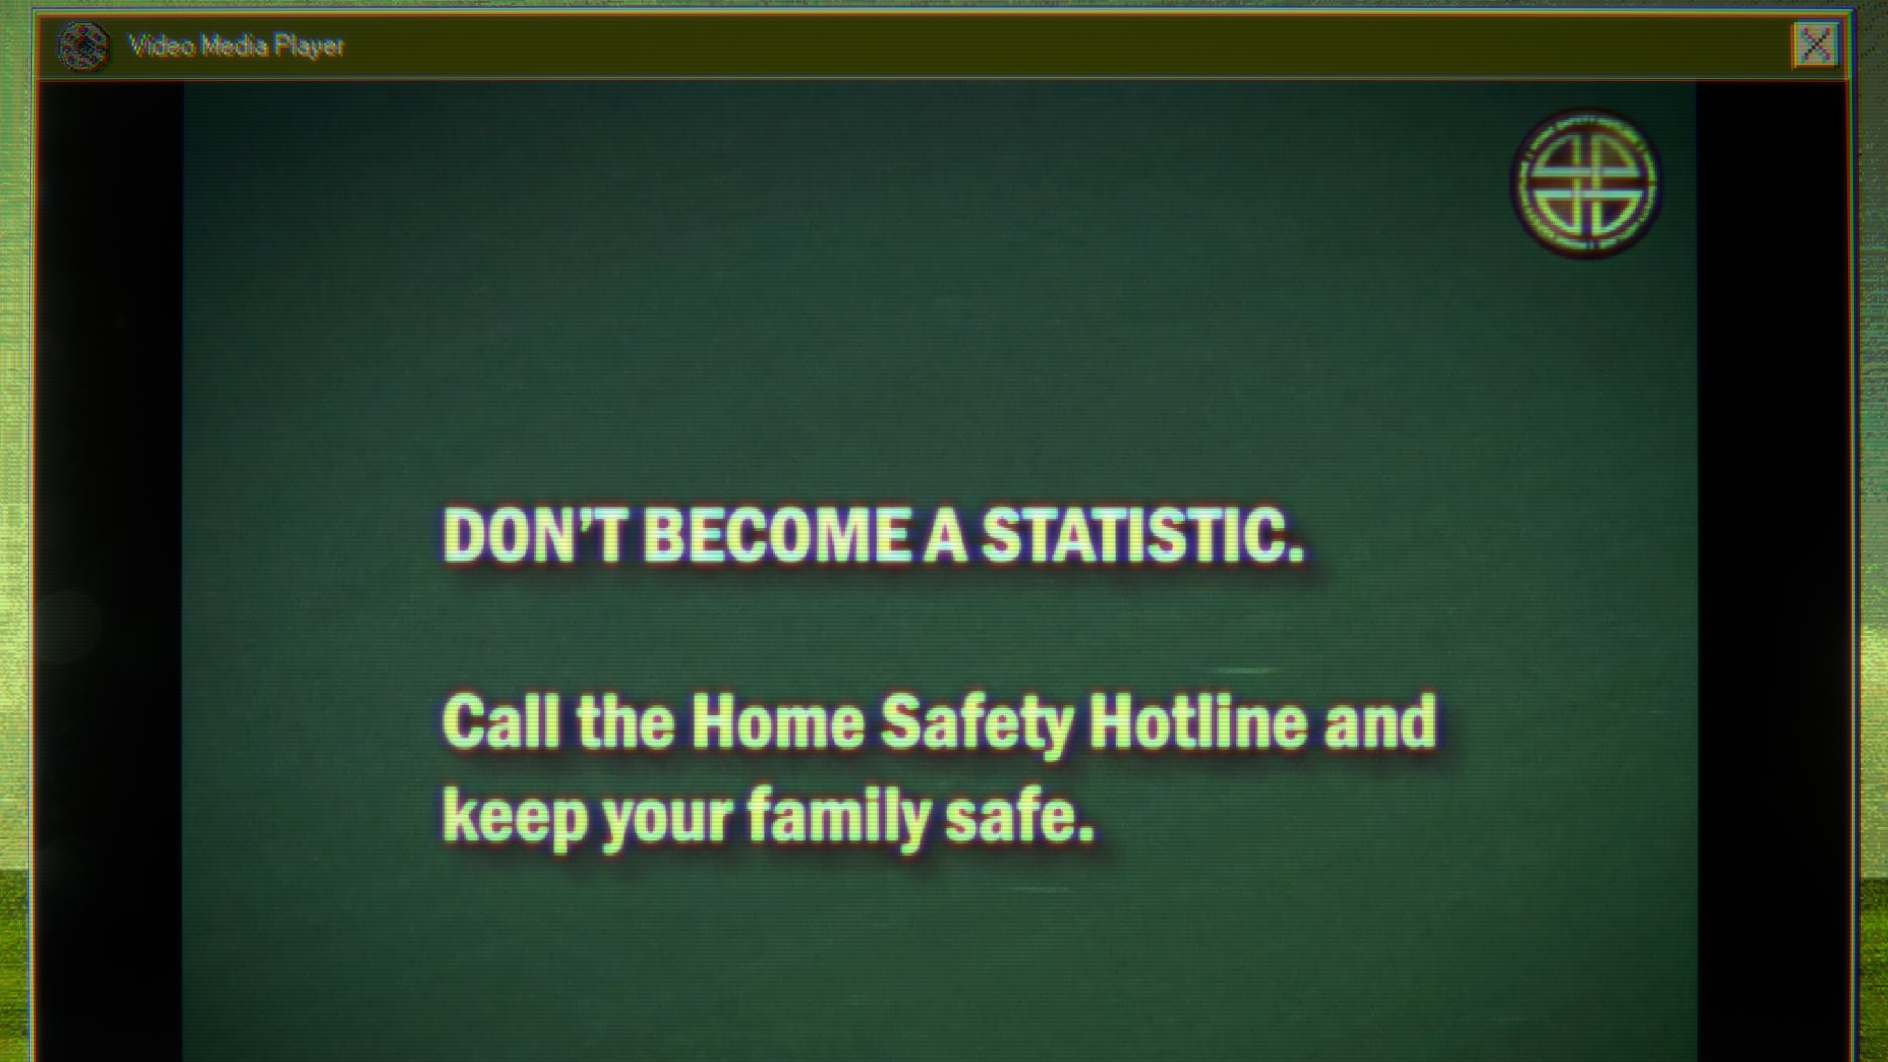  Spooky '90s call centre sim Home Safety Hotline has wired up a direct line to my heart 